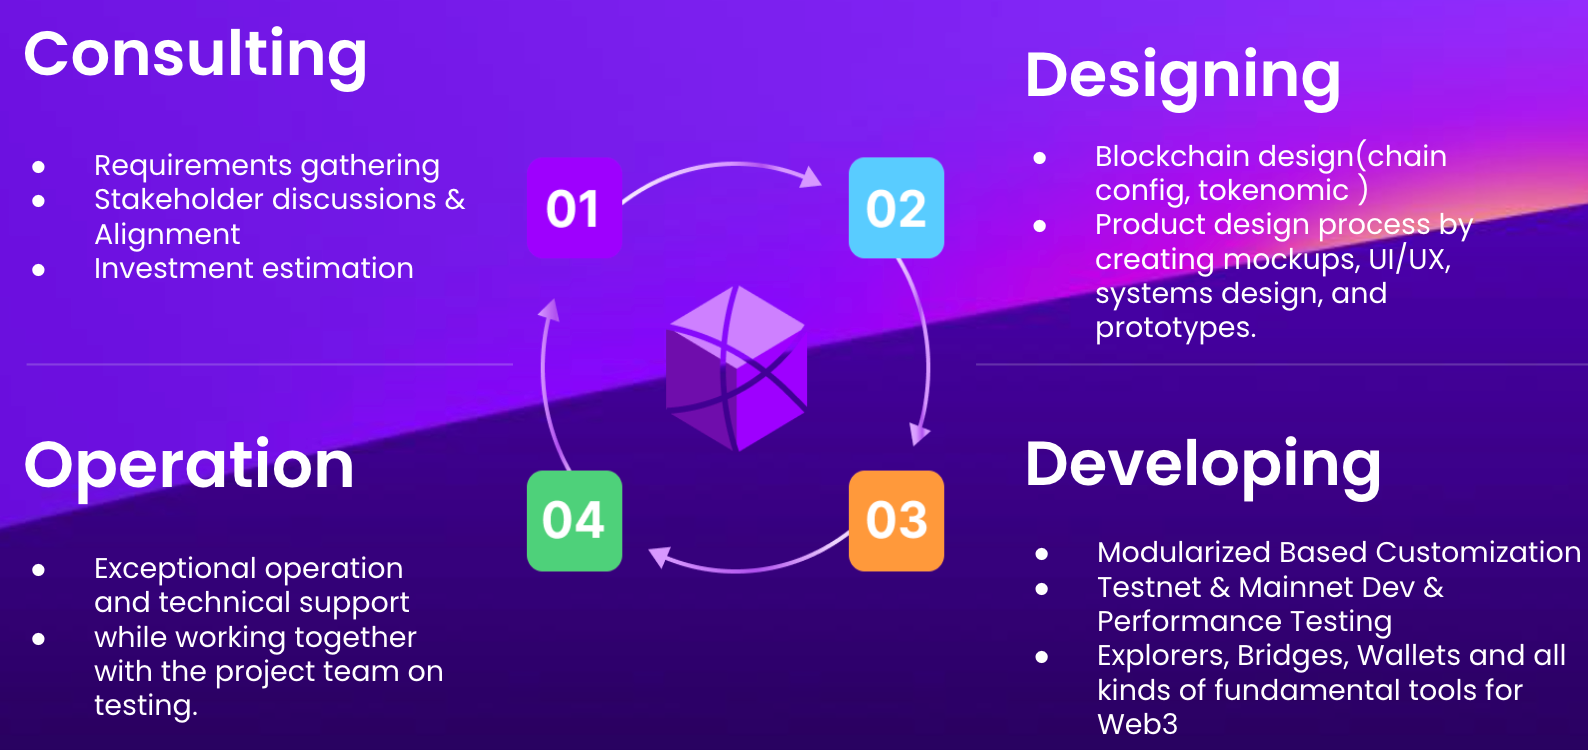 NodeReal's RaaS: One-stop Solution for Large-scale dApps